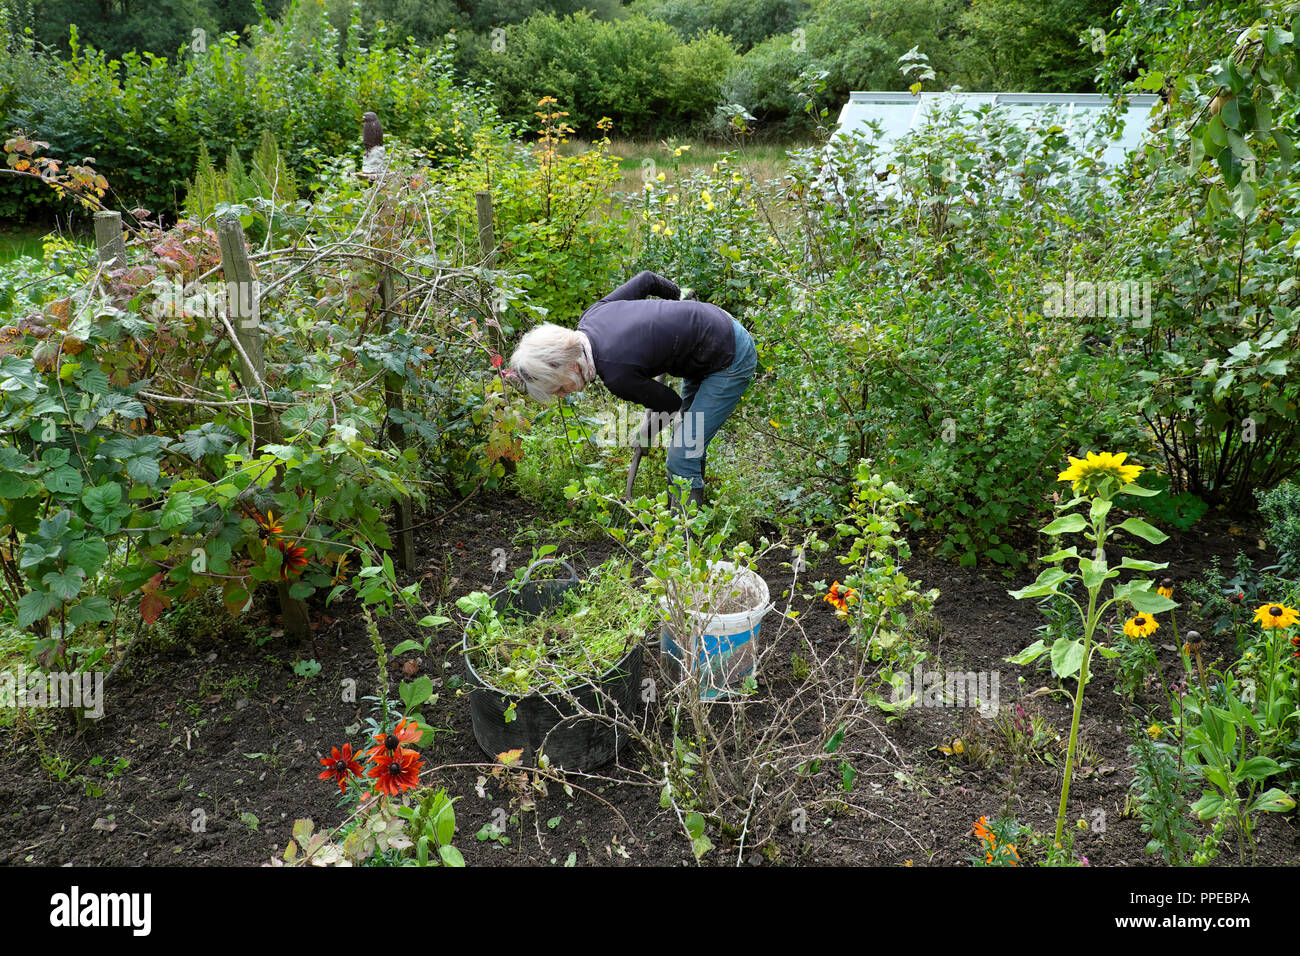 Older senior mature woman digging and weeding in a veg vegetable fruit and flower garden in autumn Carmarthenshire West Wales UK  KATHY DEWITT Stock Photo